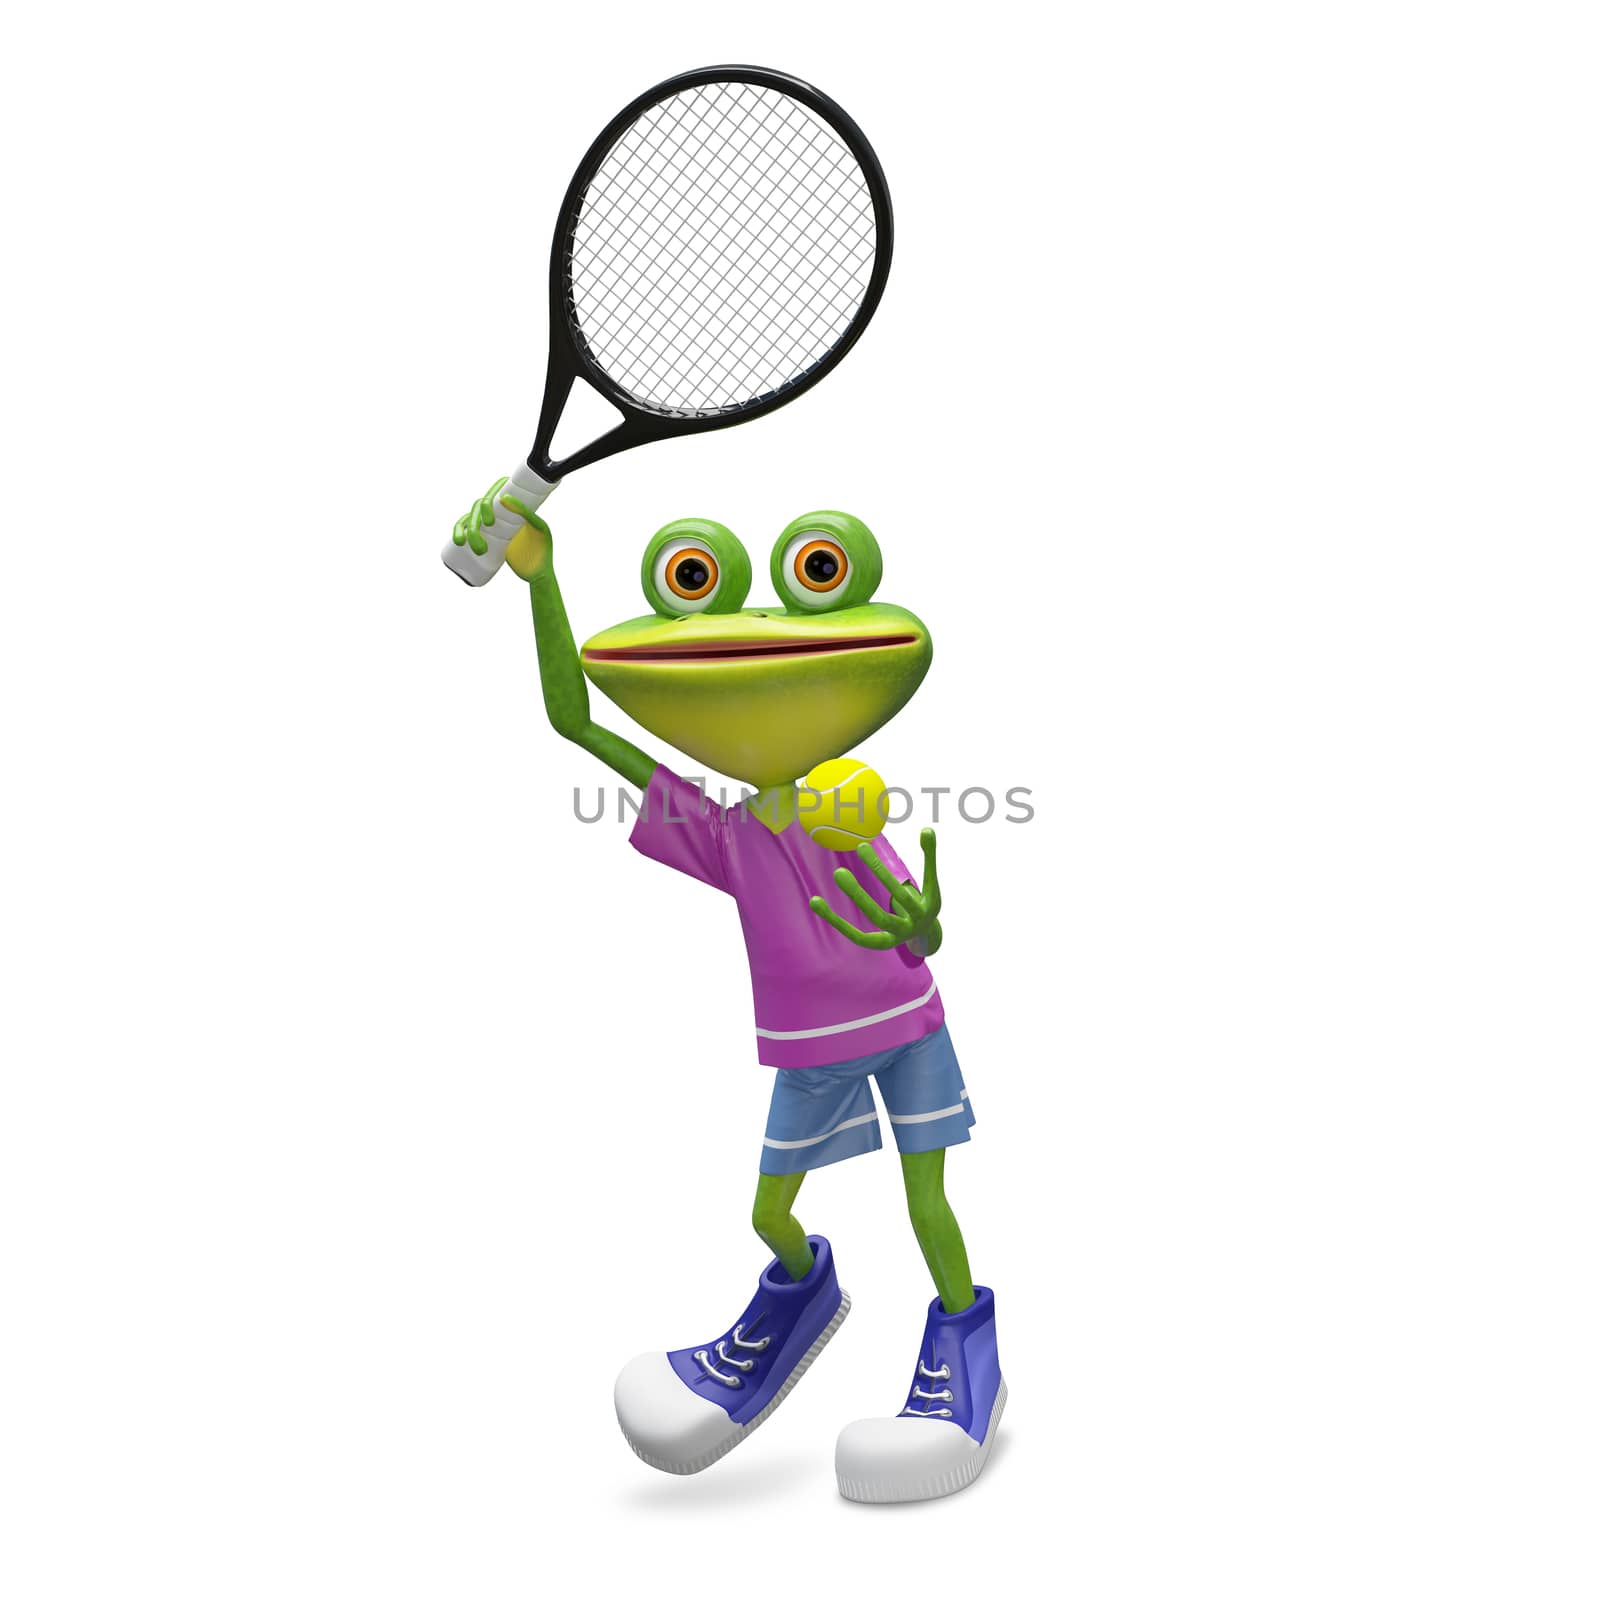 3D Illustration Frog with Tennis Racket on a White Background
